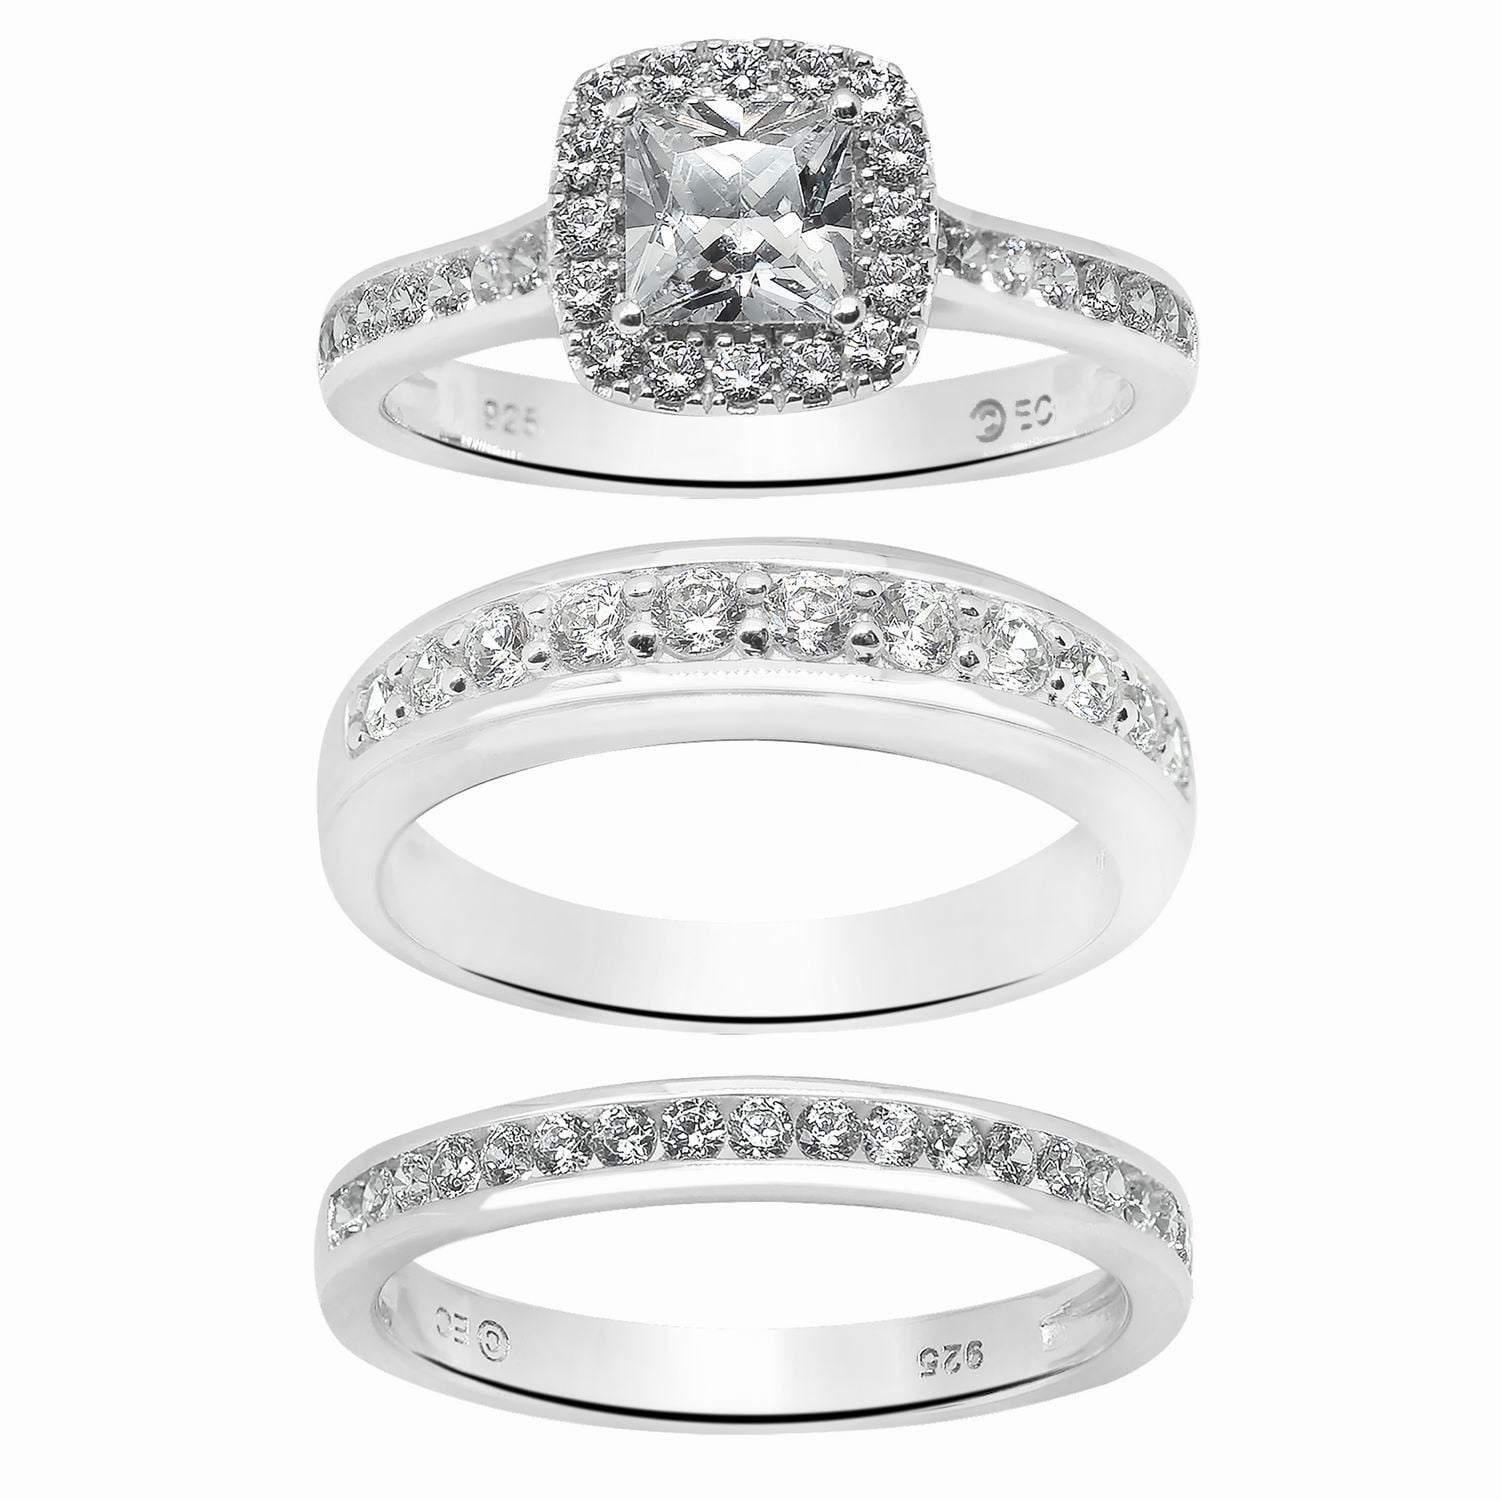 His Her Mens and Woman Diamonds Wedding Ring Bands Trio Bridal Set Silver 925 